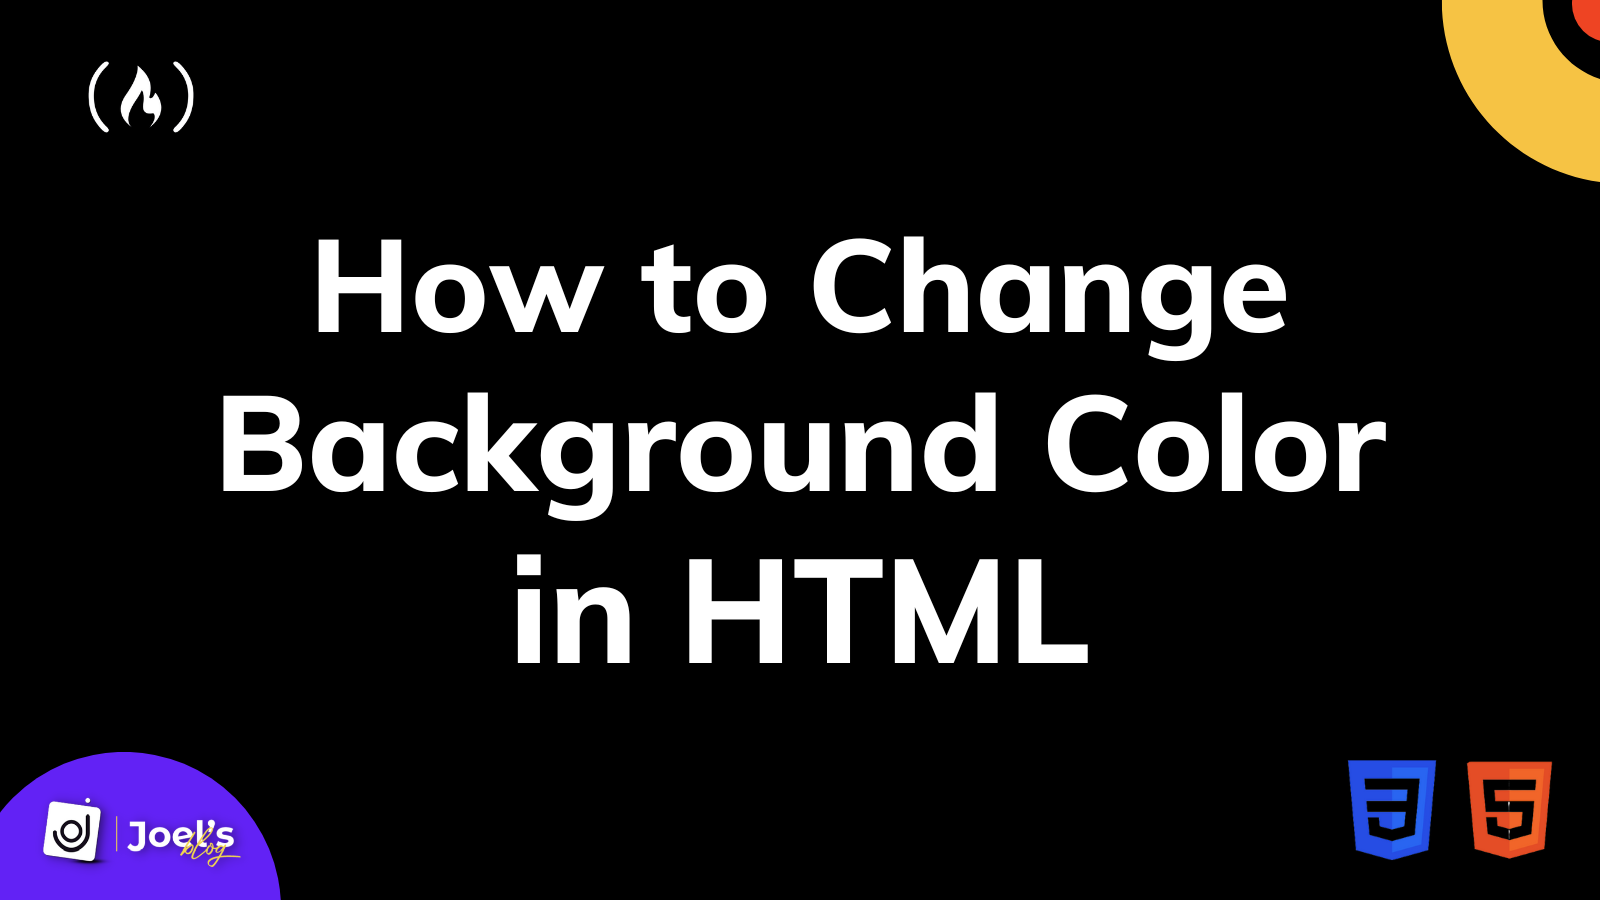 Want to add more personality to your website by changing the HTML background color? Look no further than this easy-to-follow tutorial! With just a few clicks and some simple coding, you can customize the color scheme of your website and make it truly yours. Click to watch now and get started!